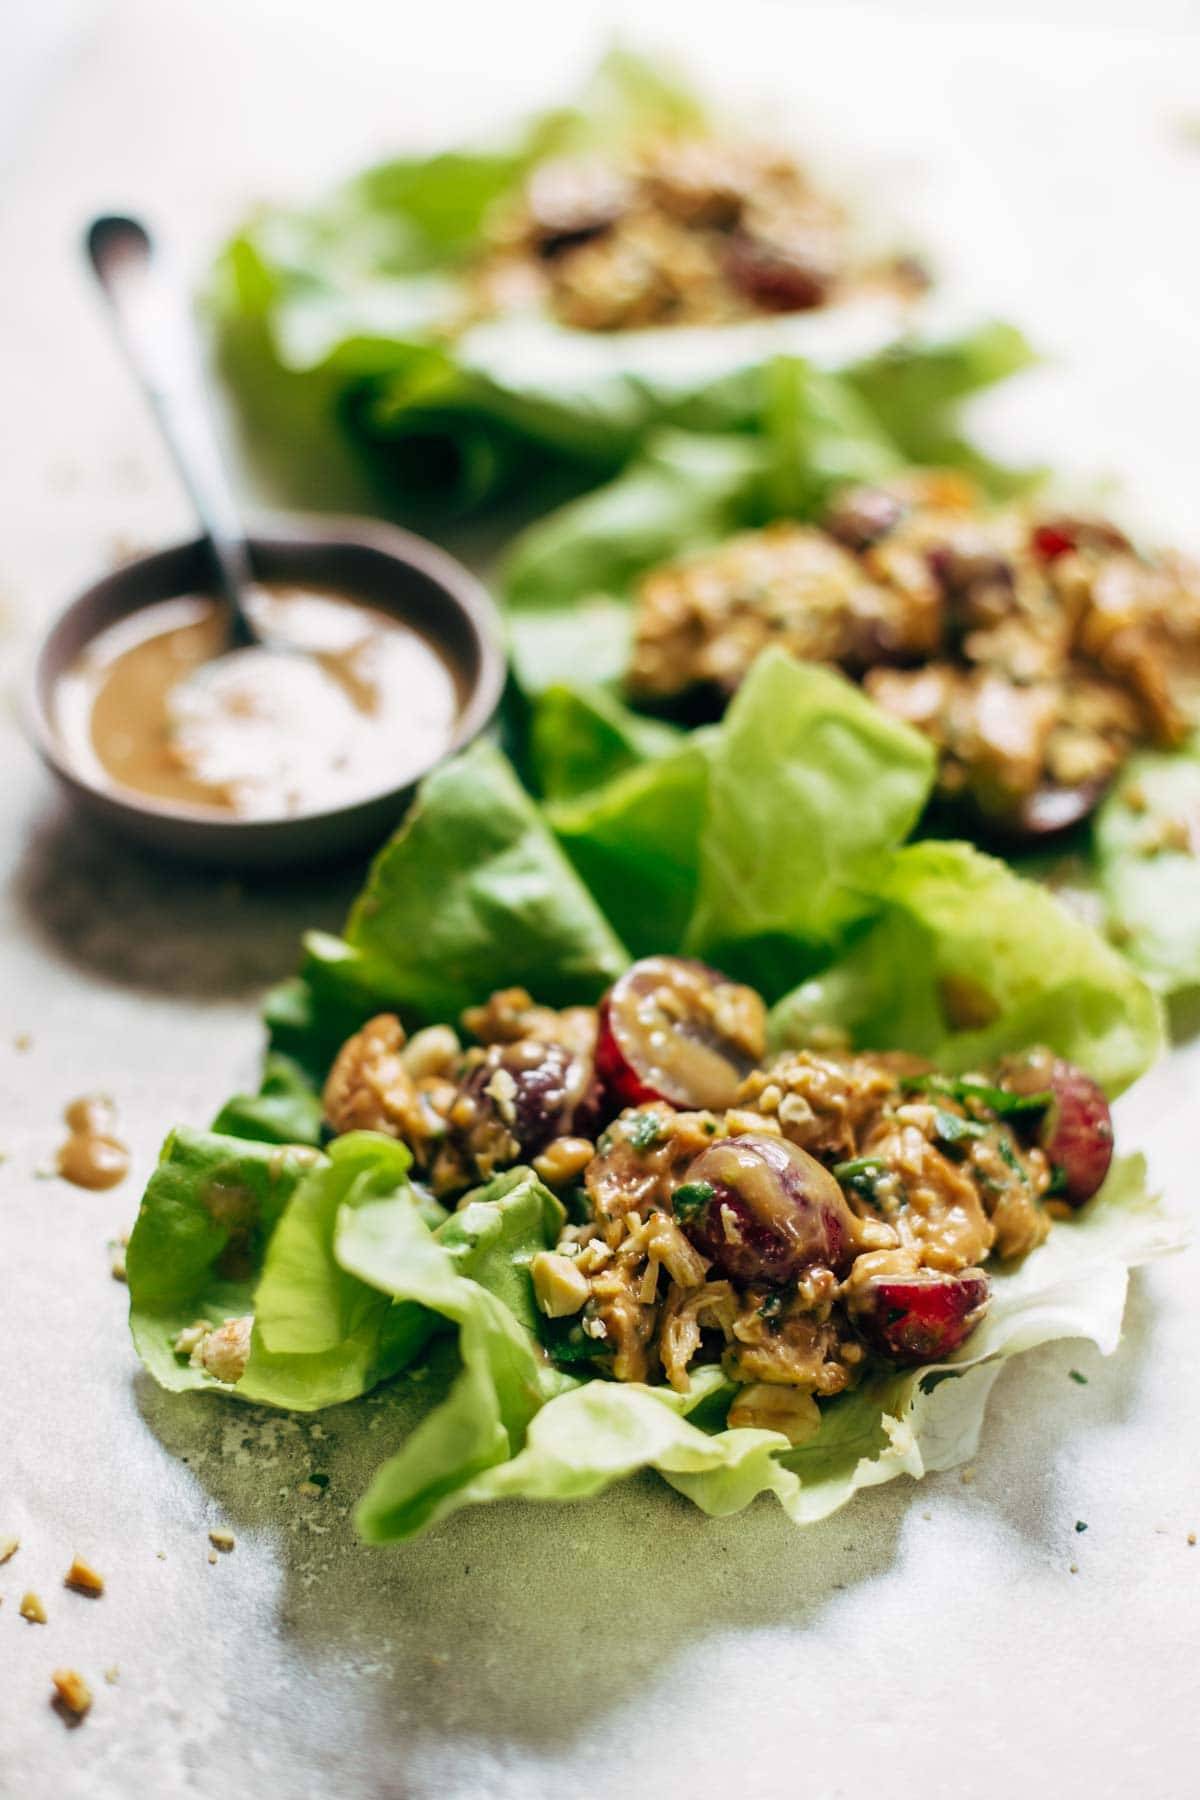 Creamy Miso Peanut Chicken Lettuce Wraps - grilled chicken and juicy grapes tossed with a simple creamy miso-peanut sauce. Super easy and healthy recipe! | pinchofyum.com